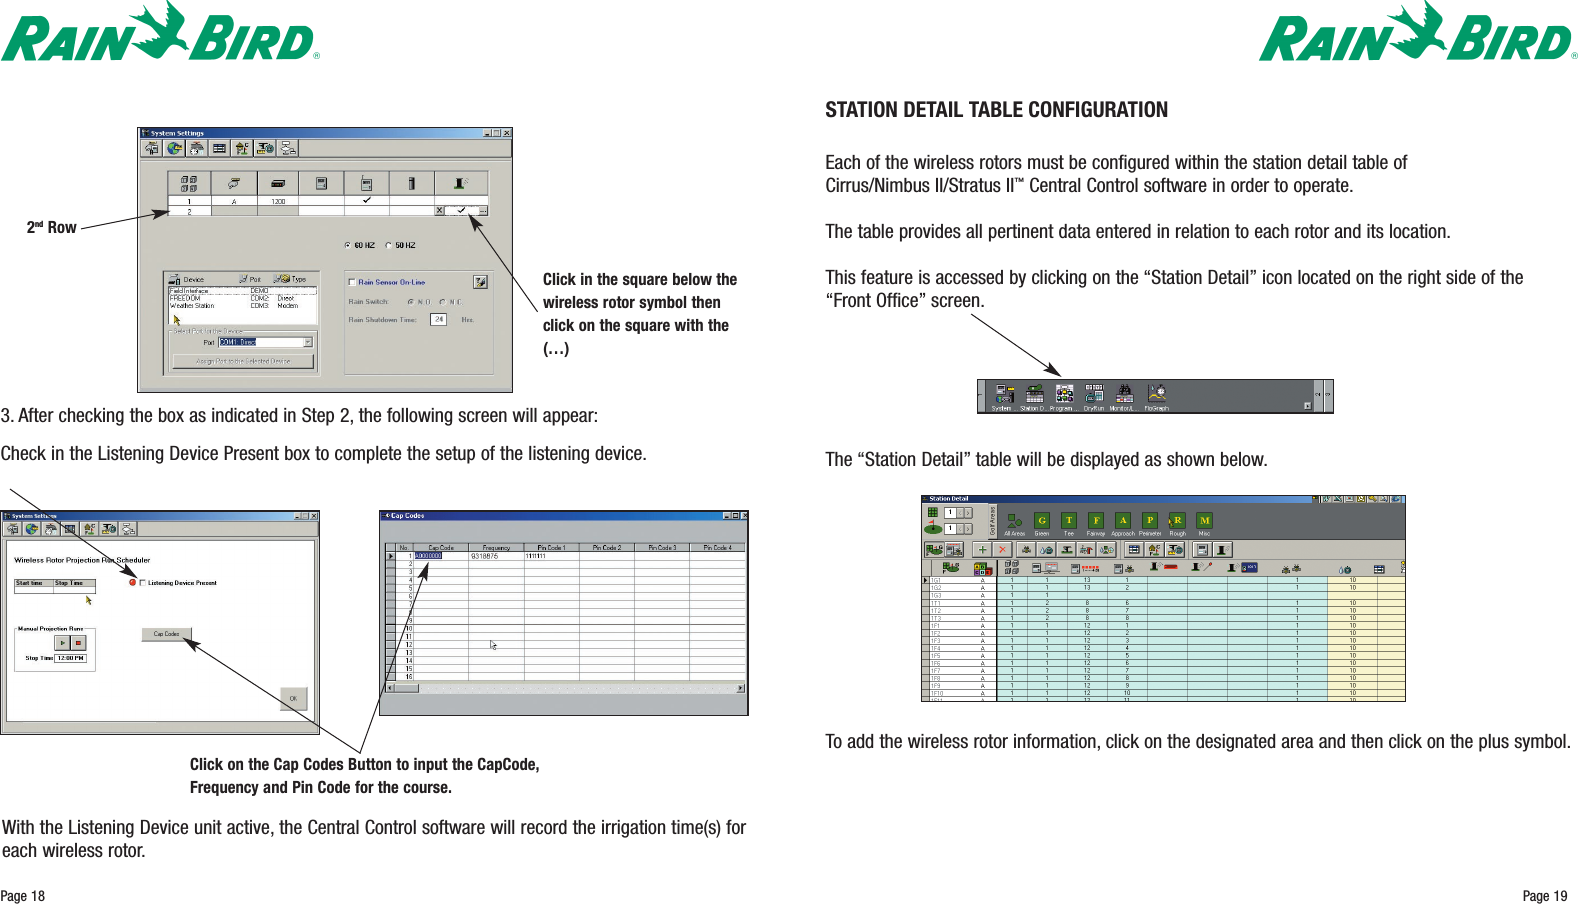 Page 19STATION DETAIL TABLE CONFIGURATIONEach of the wireless rotors must be configured within the station detail table of Cirrus/Nimbus II/Stratus II™Central Control software in order to operate.The table provides all pertinent data entered in relation to each rotor and its location.This feature is accessed by clicking on the “Station Detail”icon located on the right side of the“Front Office”screen.Page 183. After checking the box as indicated in Step 2, the following screen will appear:Check in the Listening Device Present box to complete the setup of the listening device.With the Listening Device unit active, the Central Control software will record the irrigation time(s) foreach wireless rotor.Click in the square below thewireless rotor symbol thenclick on the square with the(…) Click on the Cap Codes Button to input the CapCode,Frequency and Pin Code for the course.2nd RowThe “Station Detail”table will be displayed as shown below.To add the wireless rotor information, click on the designated area and then click on the plus symbol.